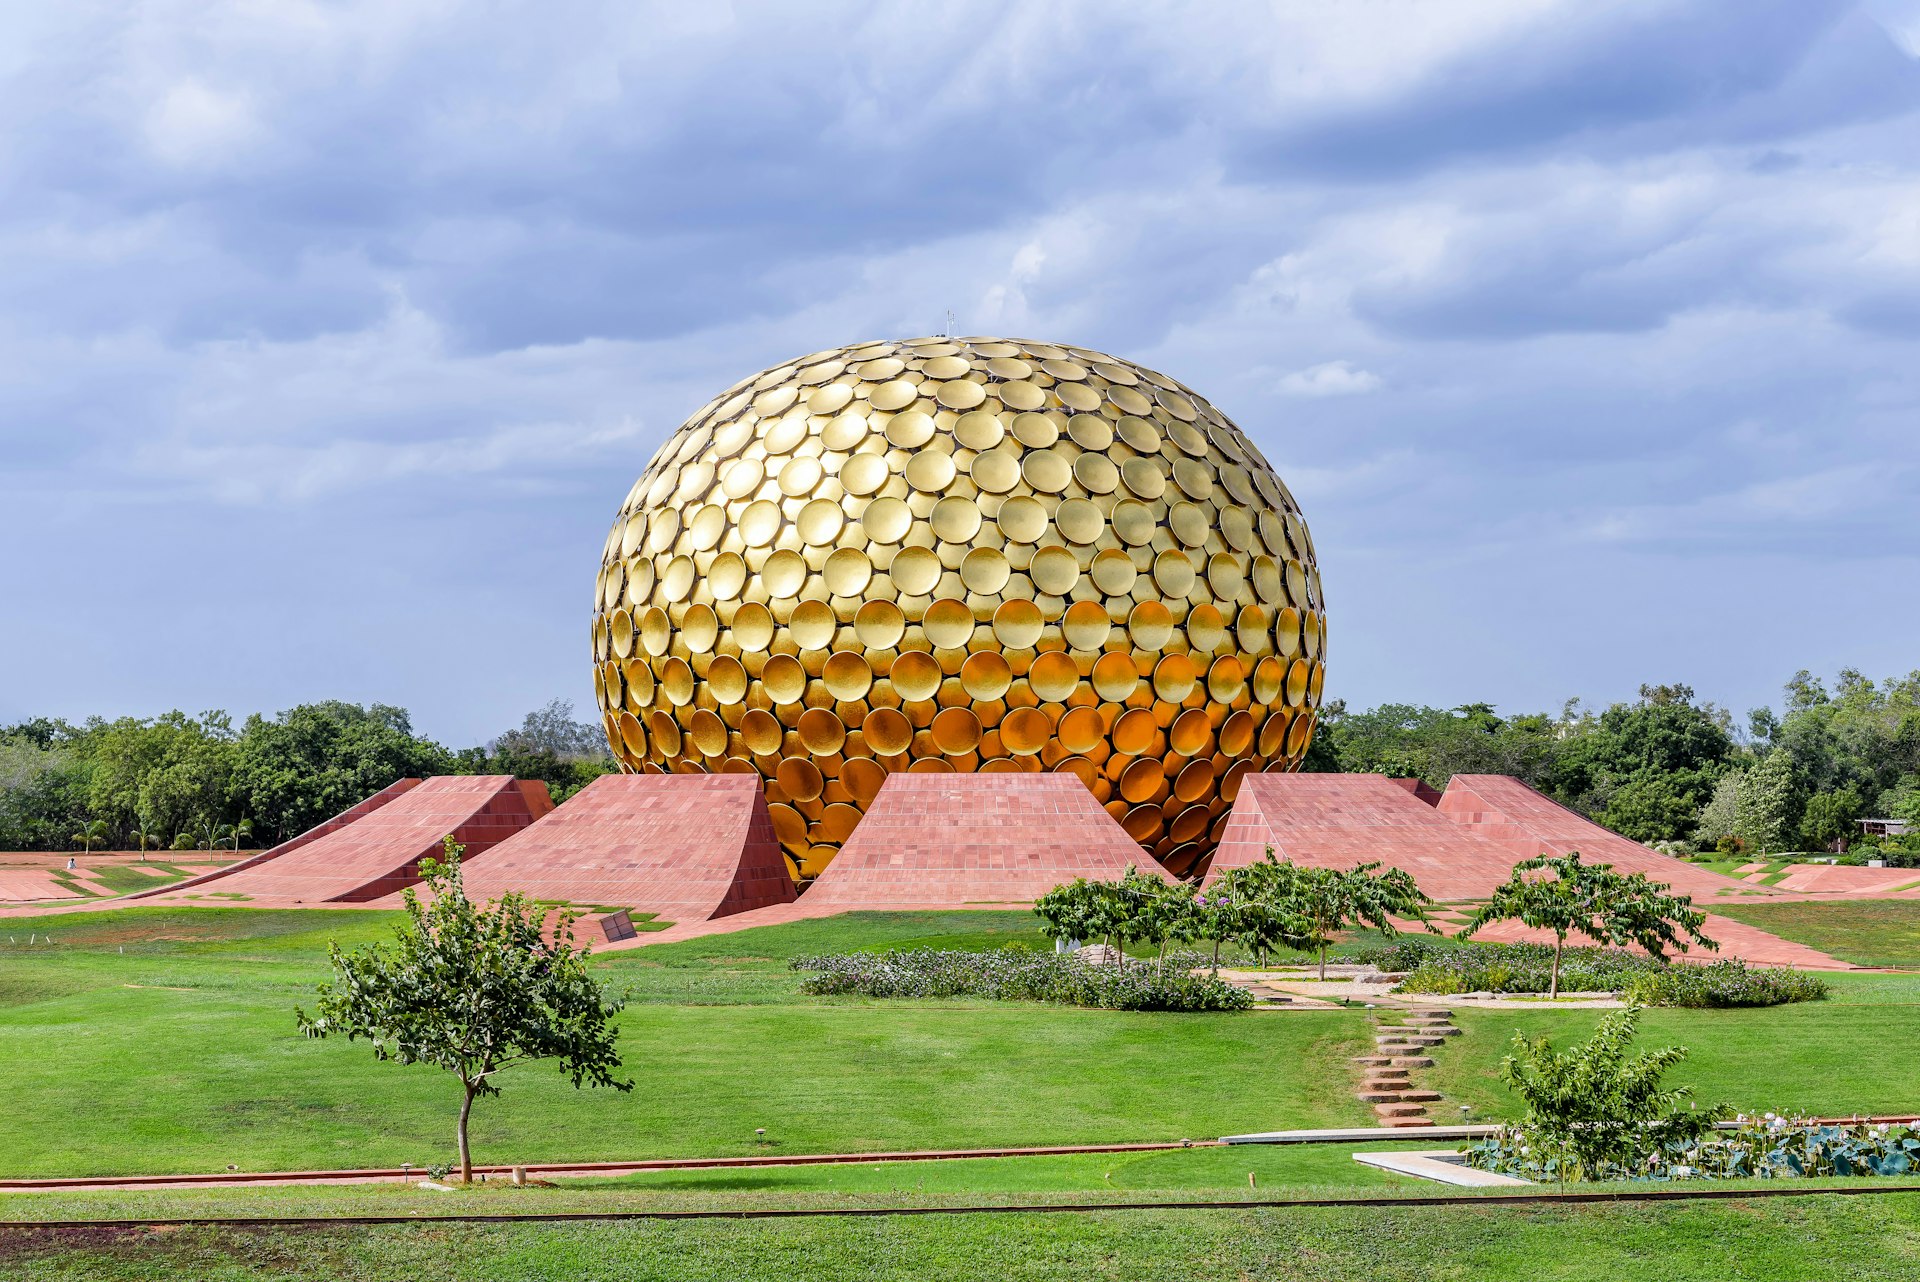 Matrimandir, an edifice of spiritual significance for practitioners of yoga, situated at the center of Auroville, Pondicherry, India